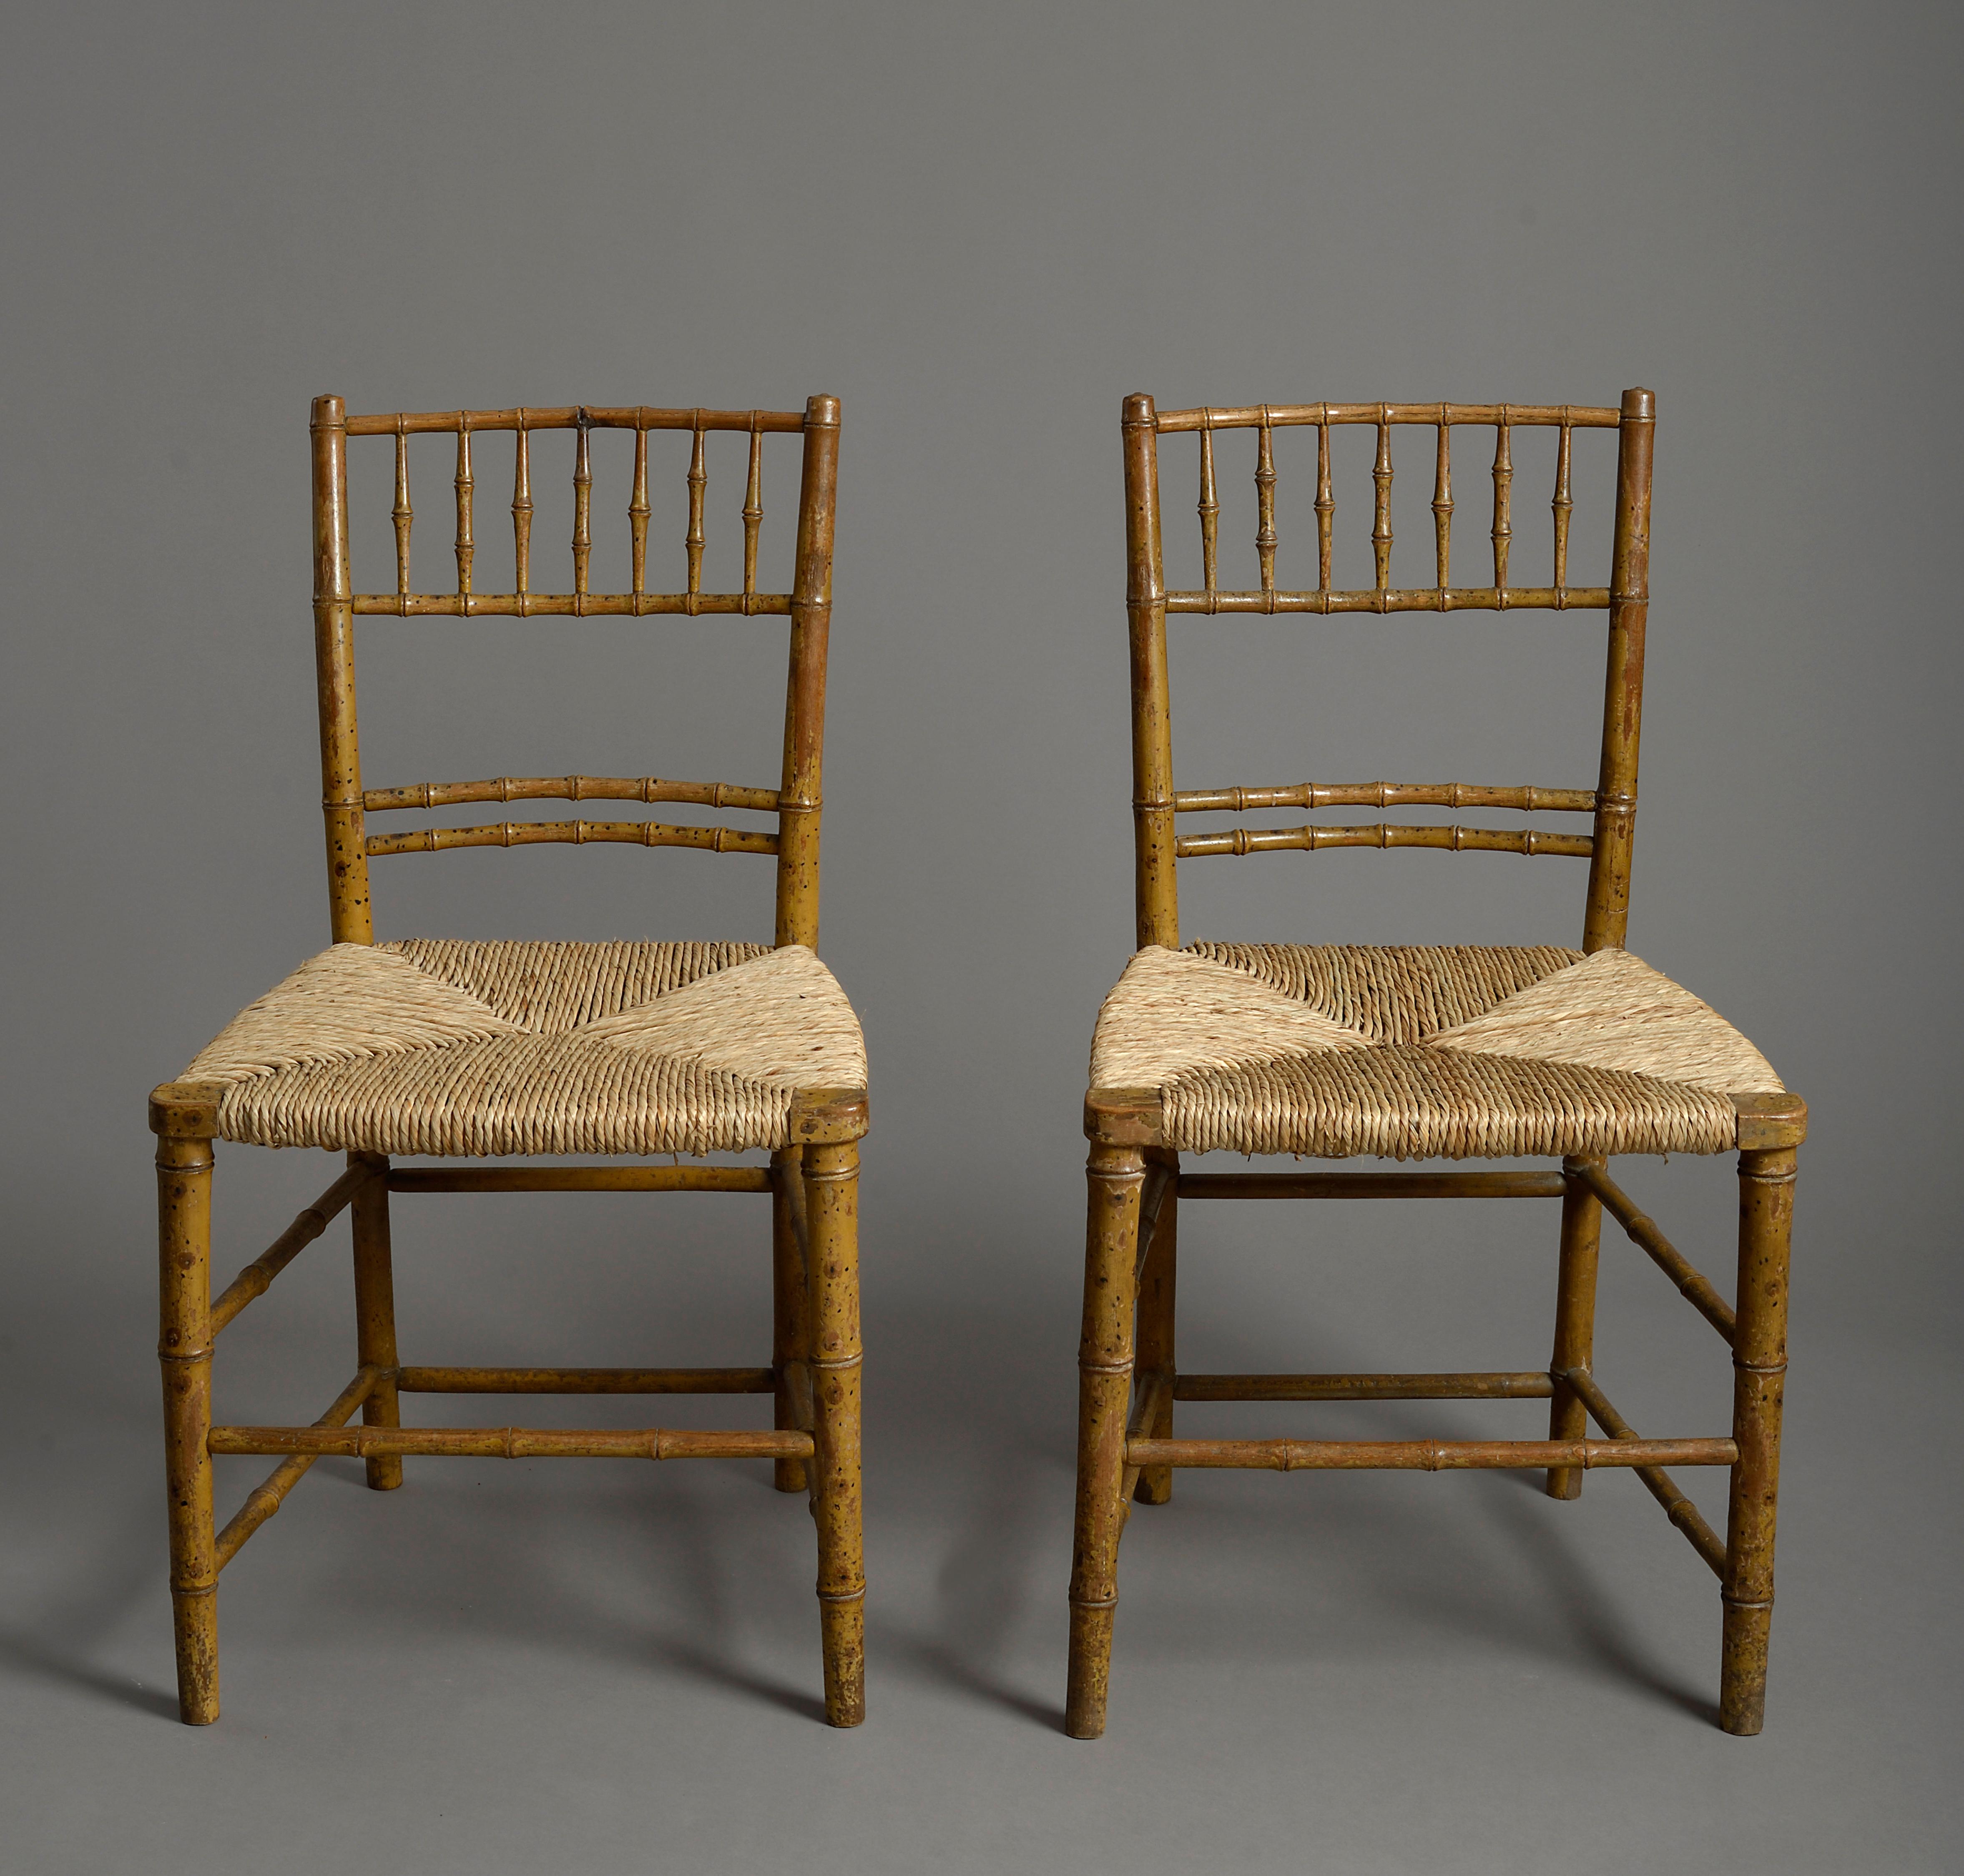 A pair of early 19th century Regency Period faux bamboo painted bedroom chairs, with spindle backs and stretchers and rush seats.